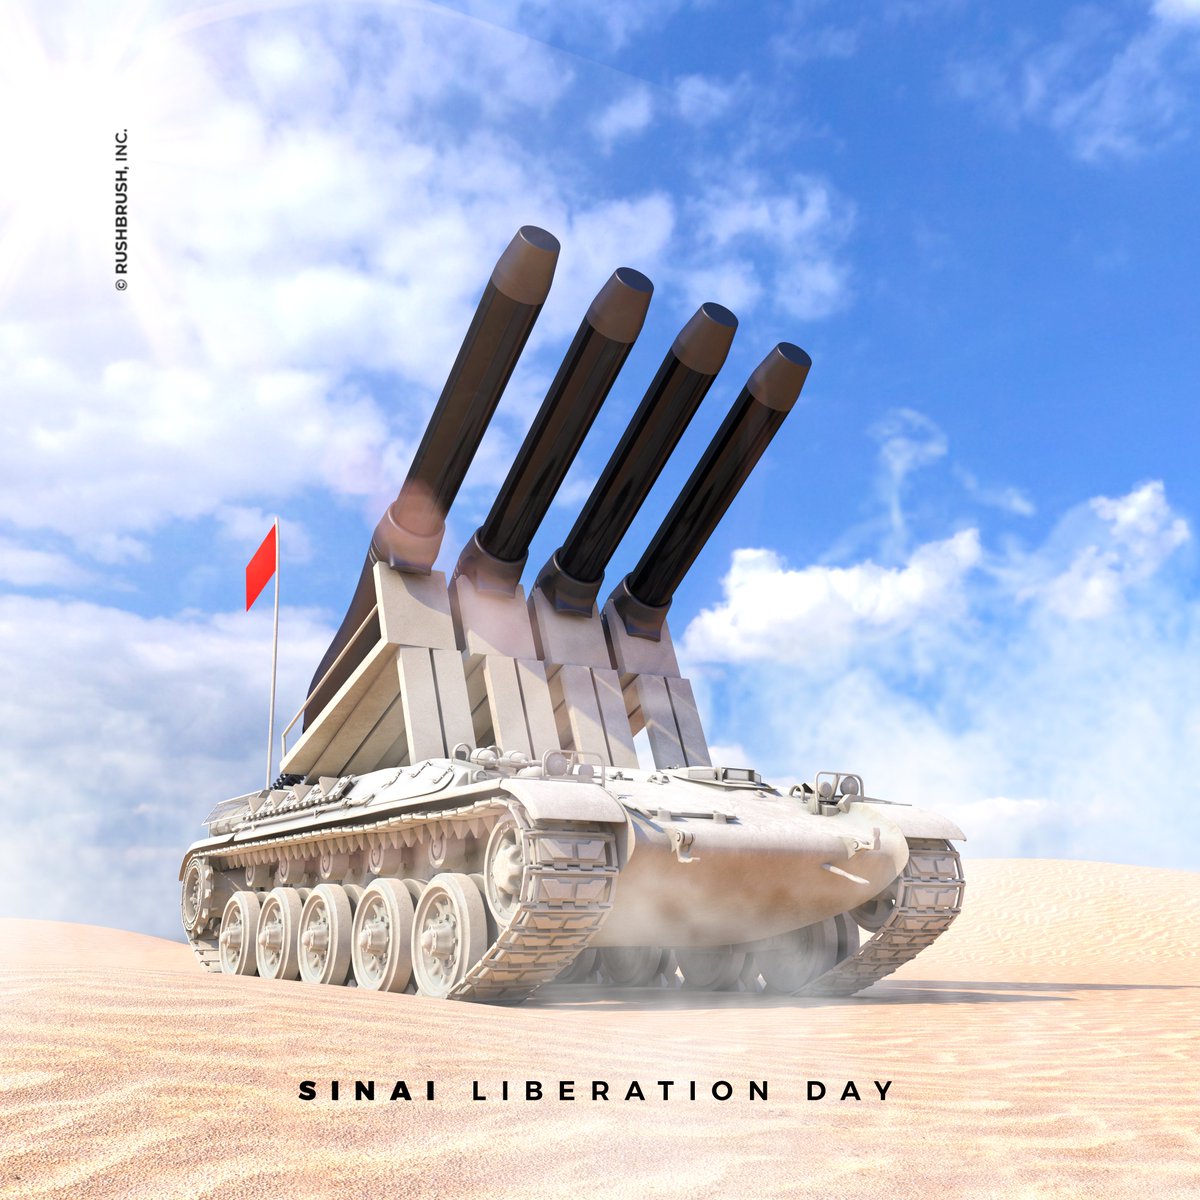 In the memory of the souls sacrificed for the sake of freedom and dignity. 🪖

Happy Sinai Liberation Day! 🇪🇬

#RUSHBRUSH #GetTheLush